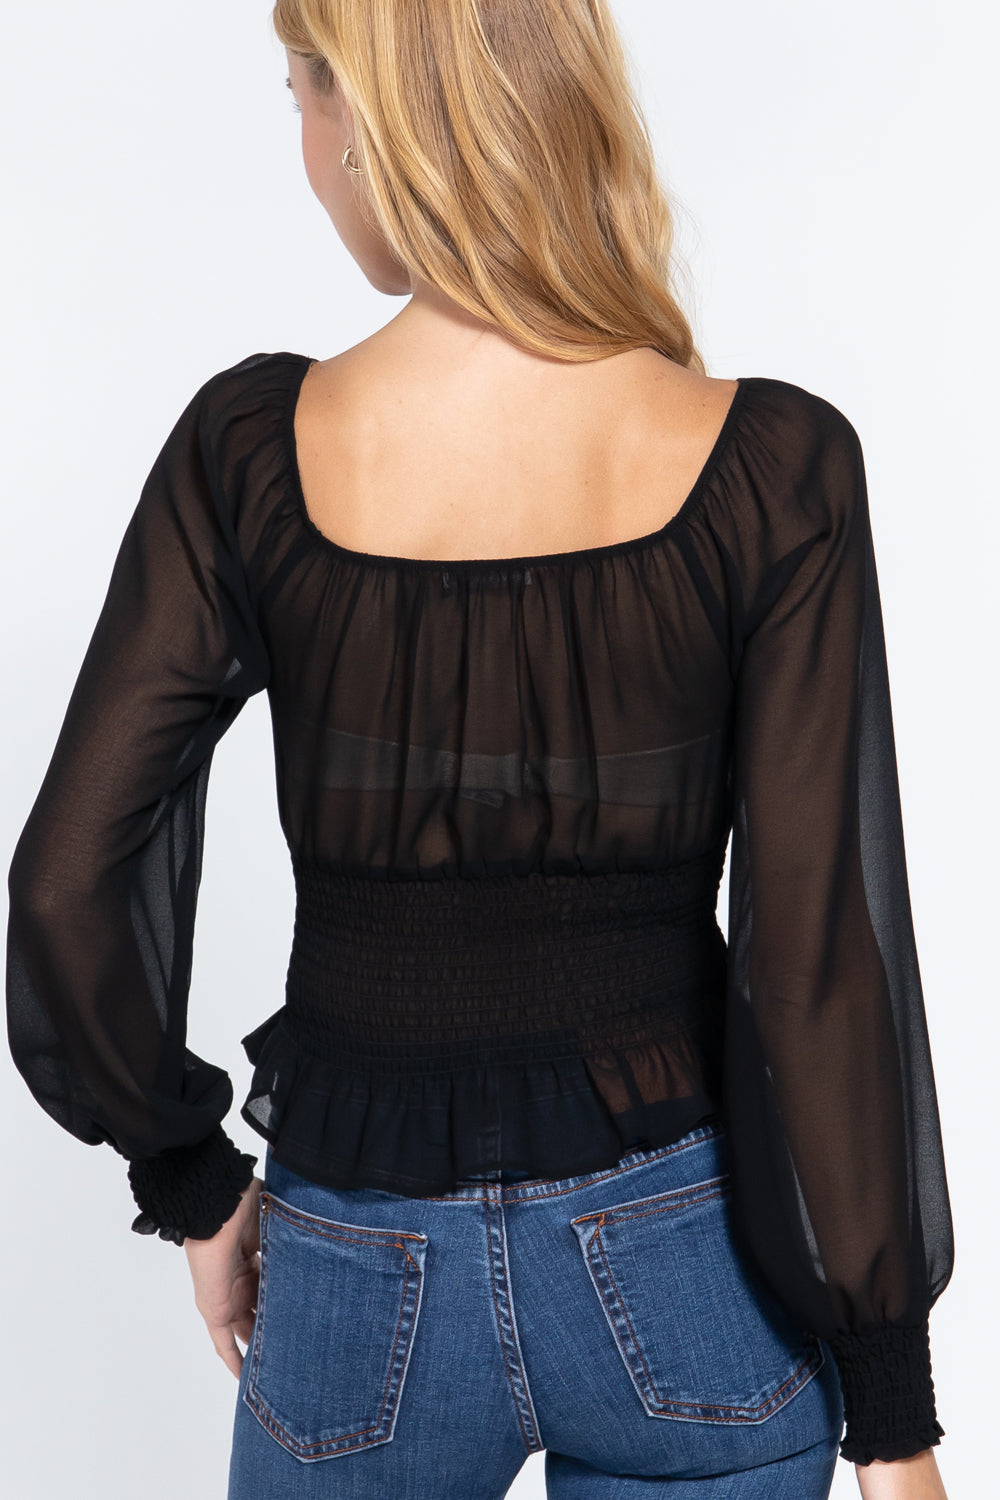 Long Sleeve Smocked Chiffon Top for Women in Black